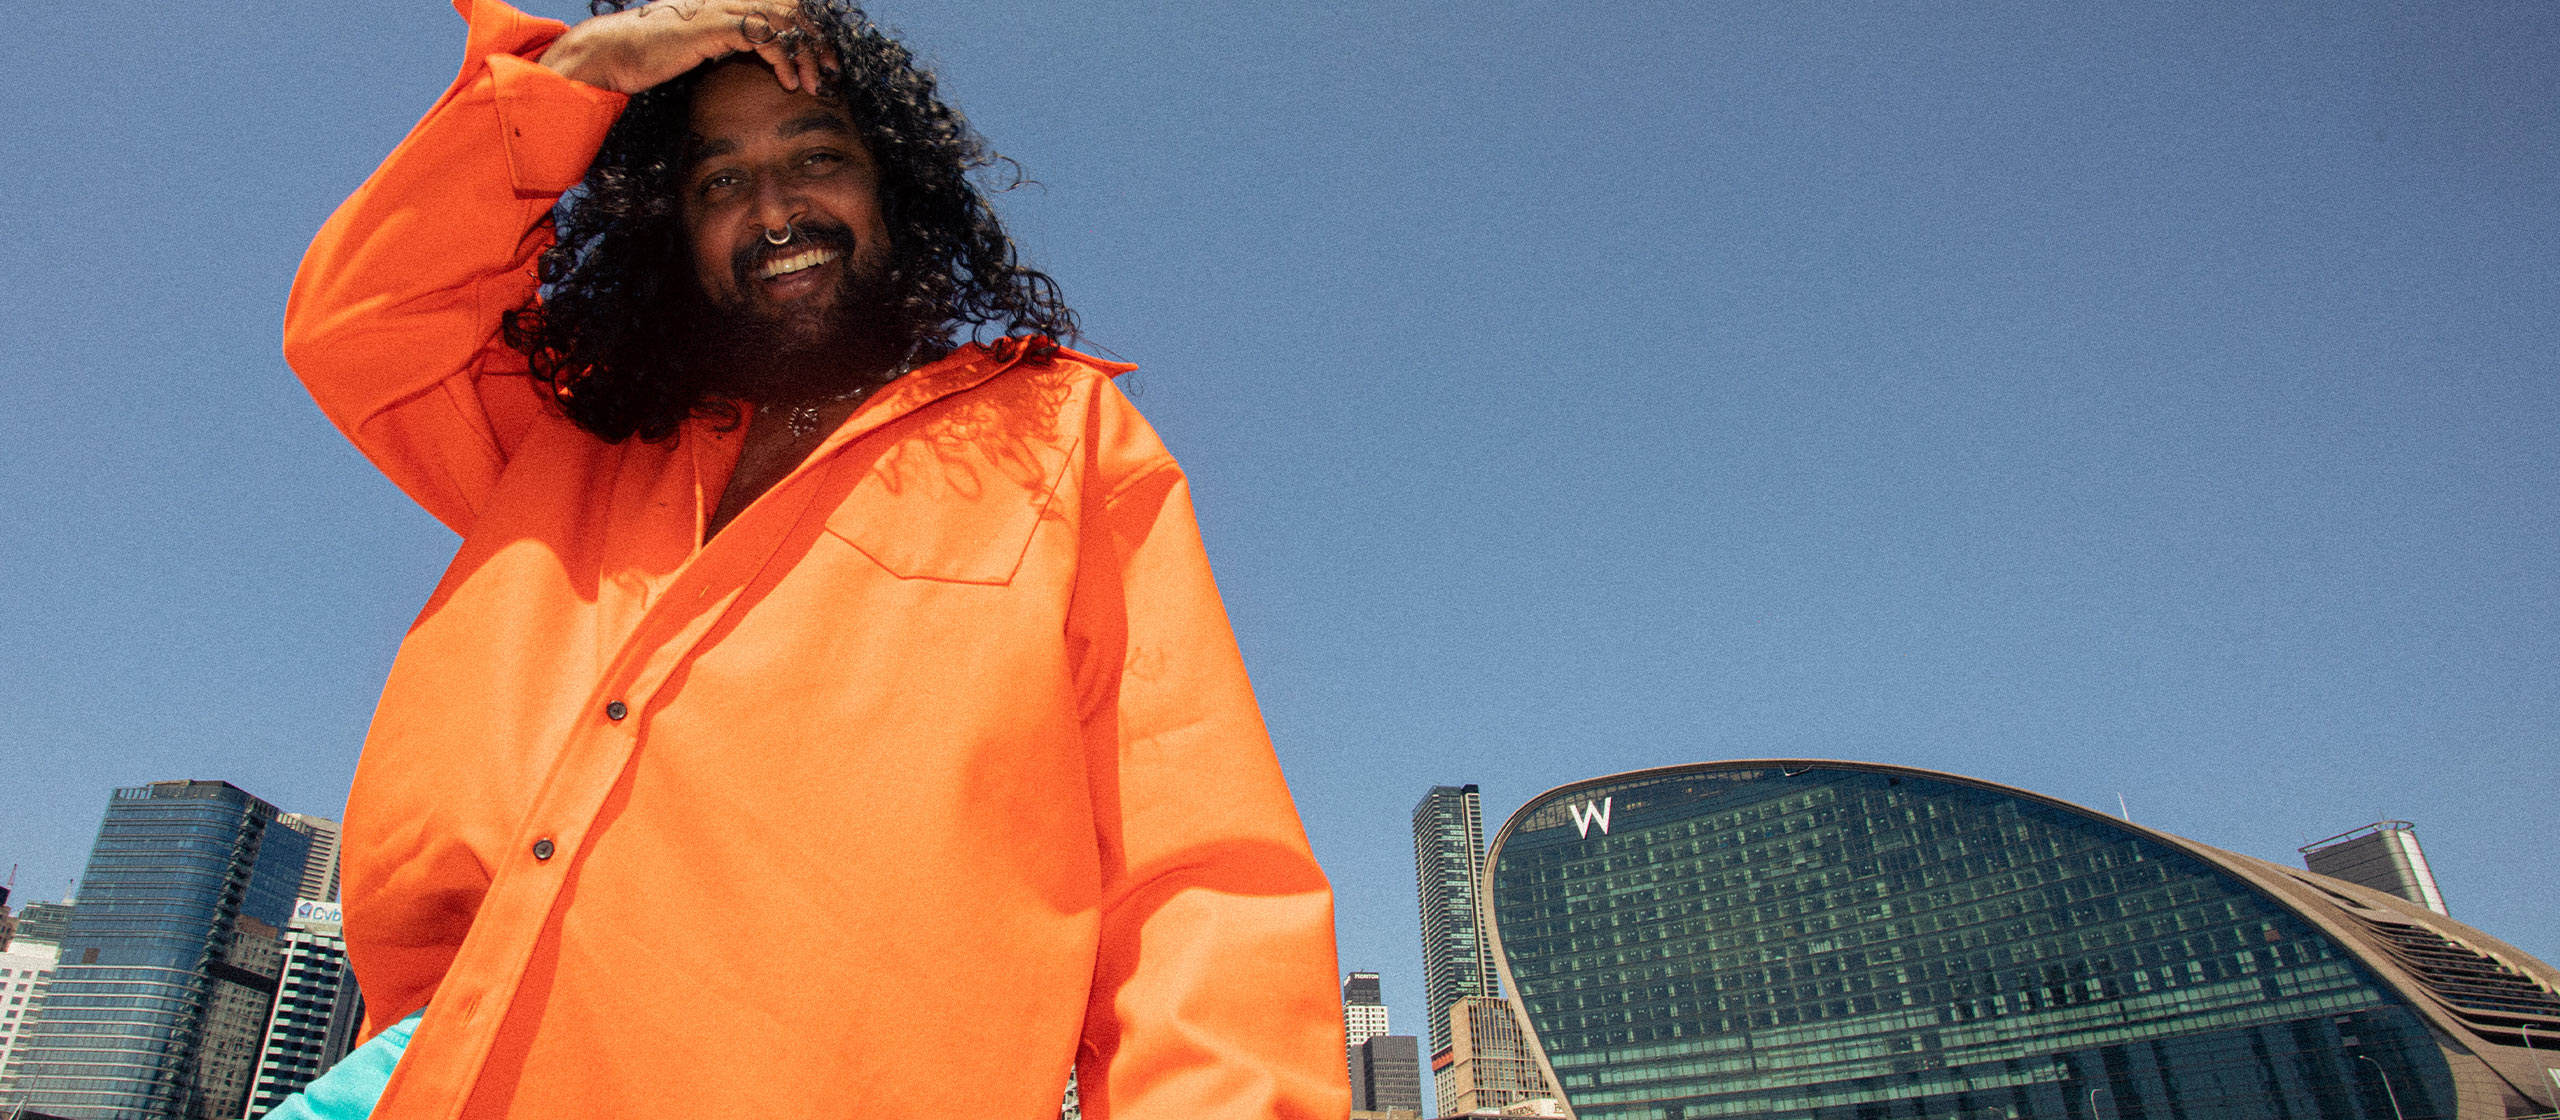 A person with long curly hair and a beard is wearing an orange jacket and standing outdoors. They are smiling and holding their left hand on their head. Modern buildings and a clear blue sky are visible in the background.